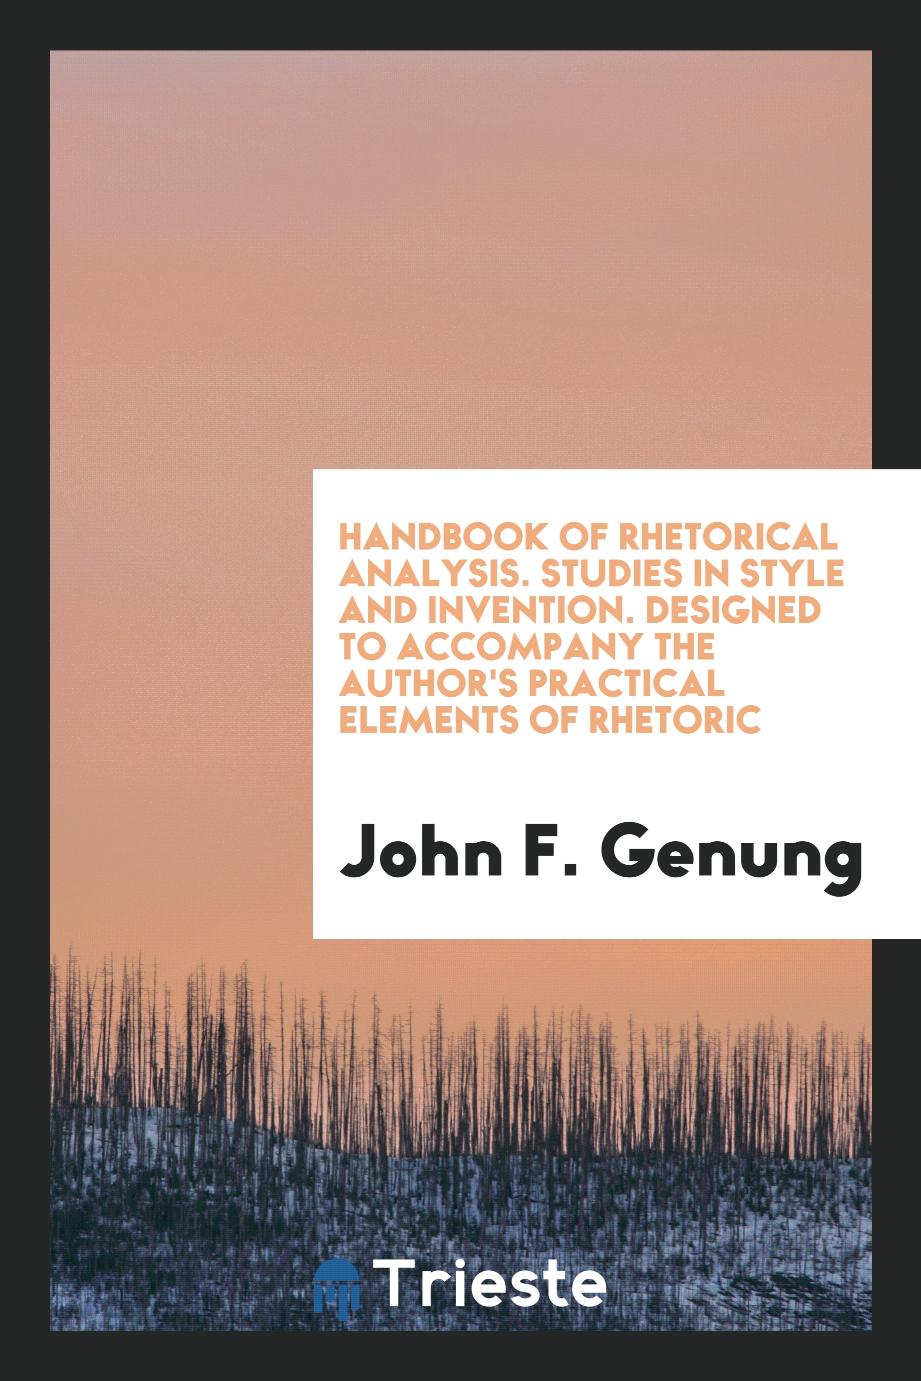 Handbook of Rhetorical Analysis. Studies in Style and Invention. Designed to Accompany the Author's Practical Elements of Rhetoric